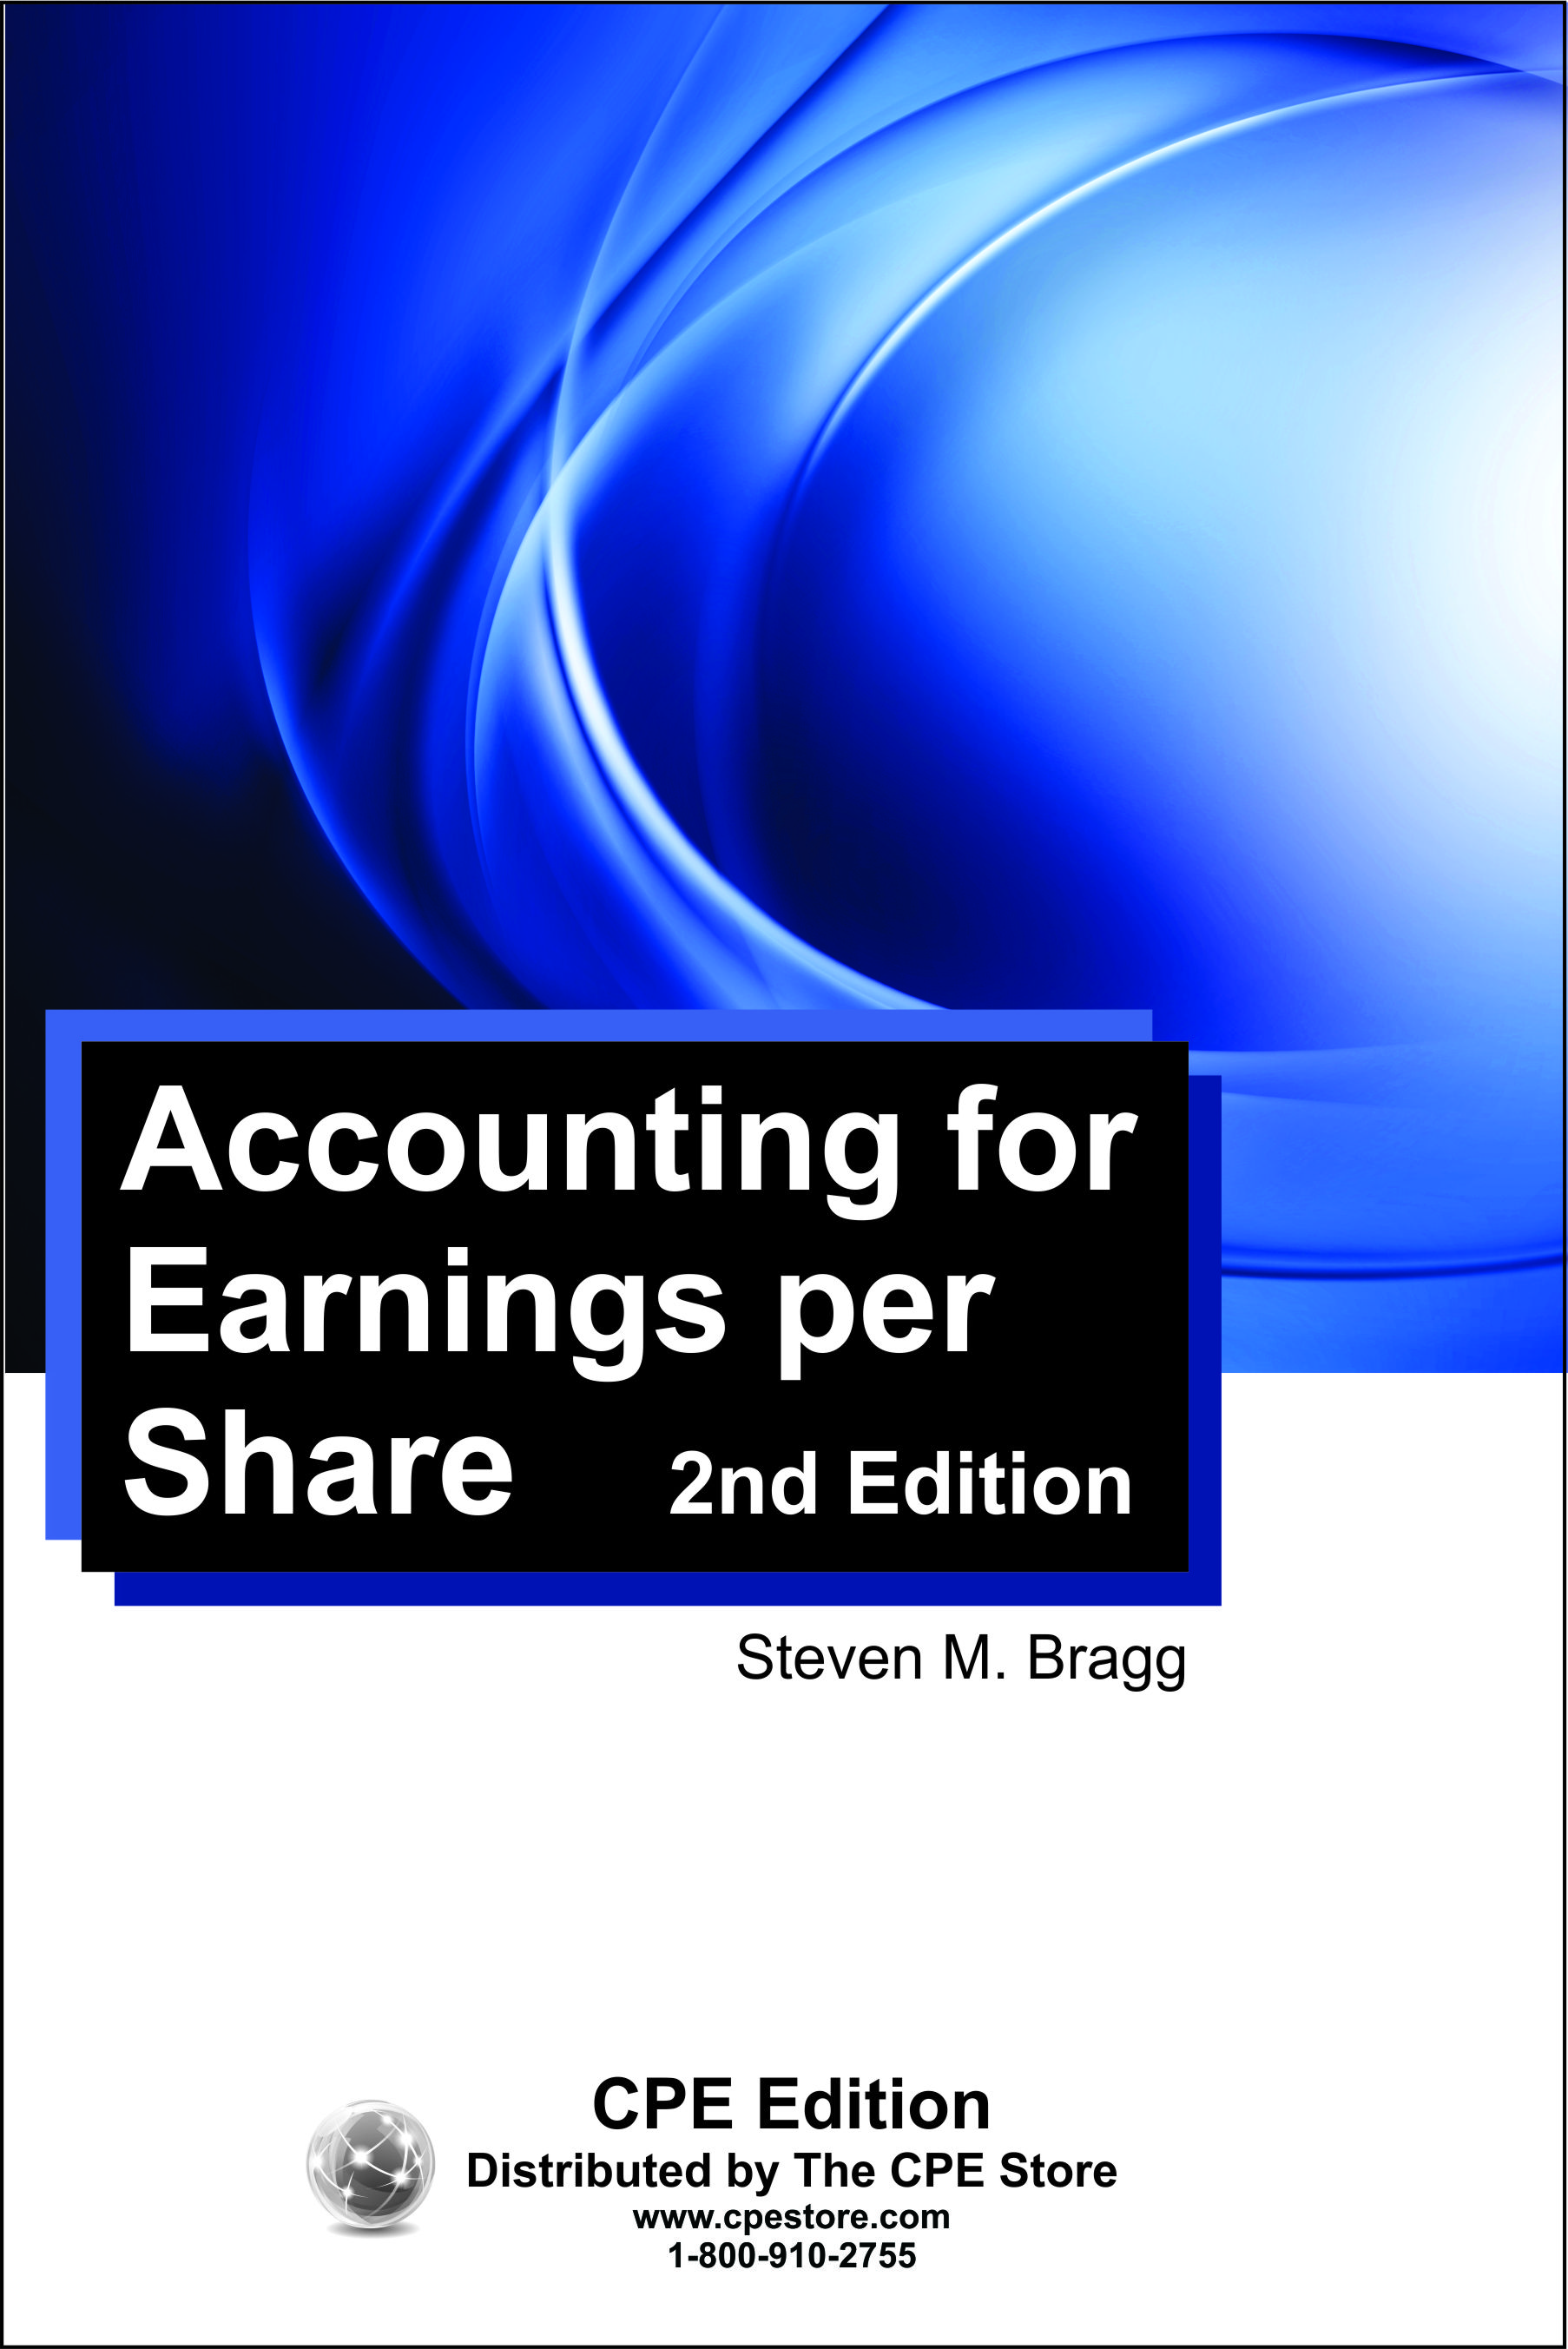 Accounting for Earnings per Share